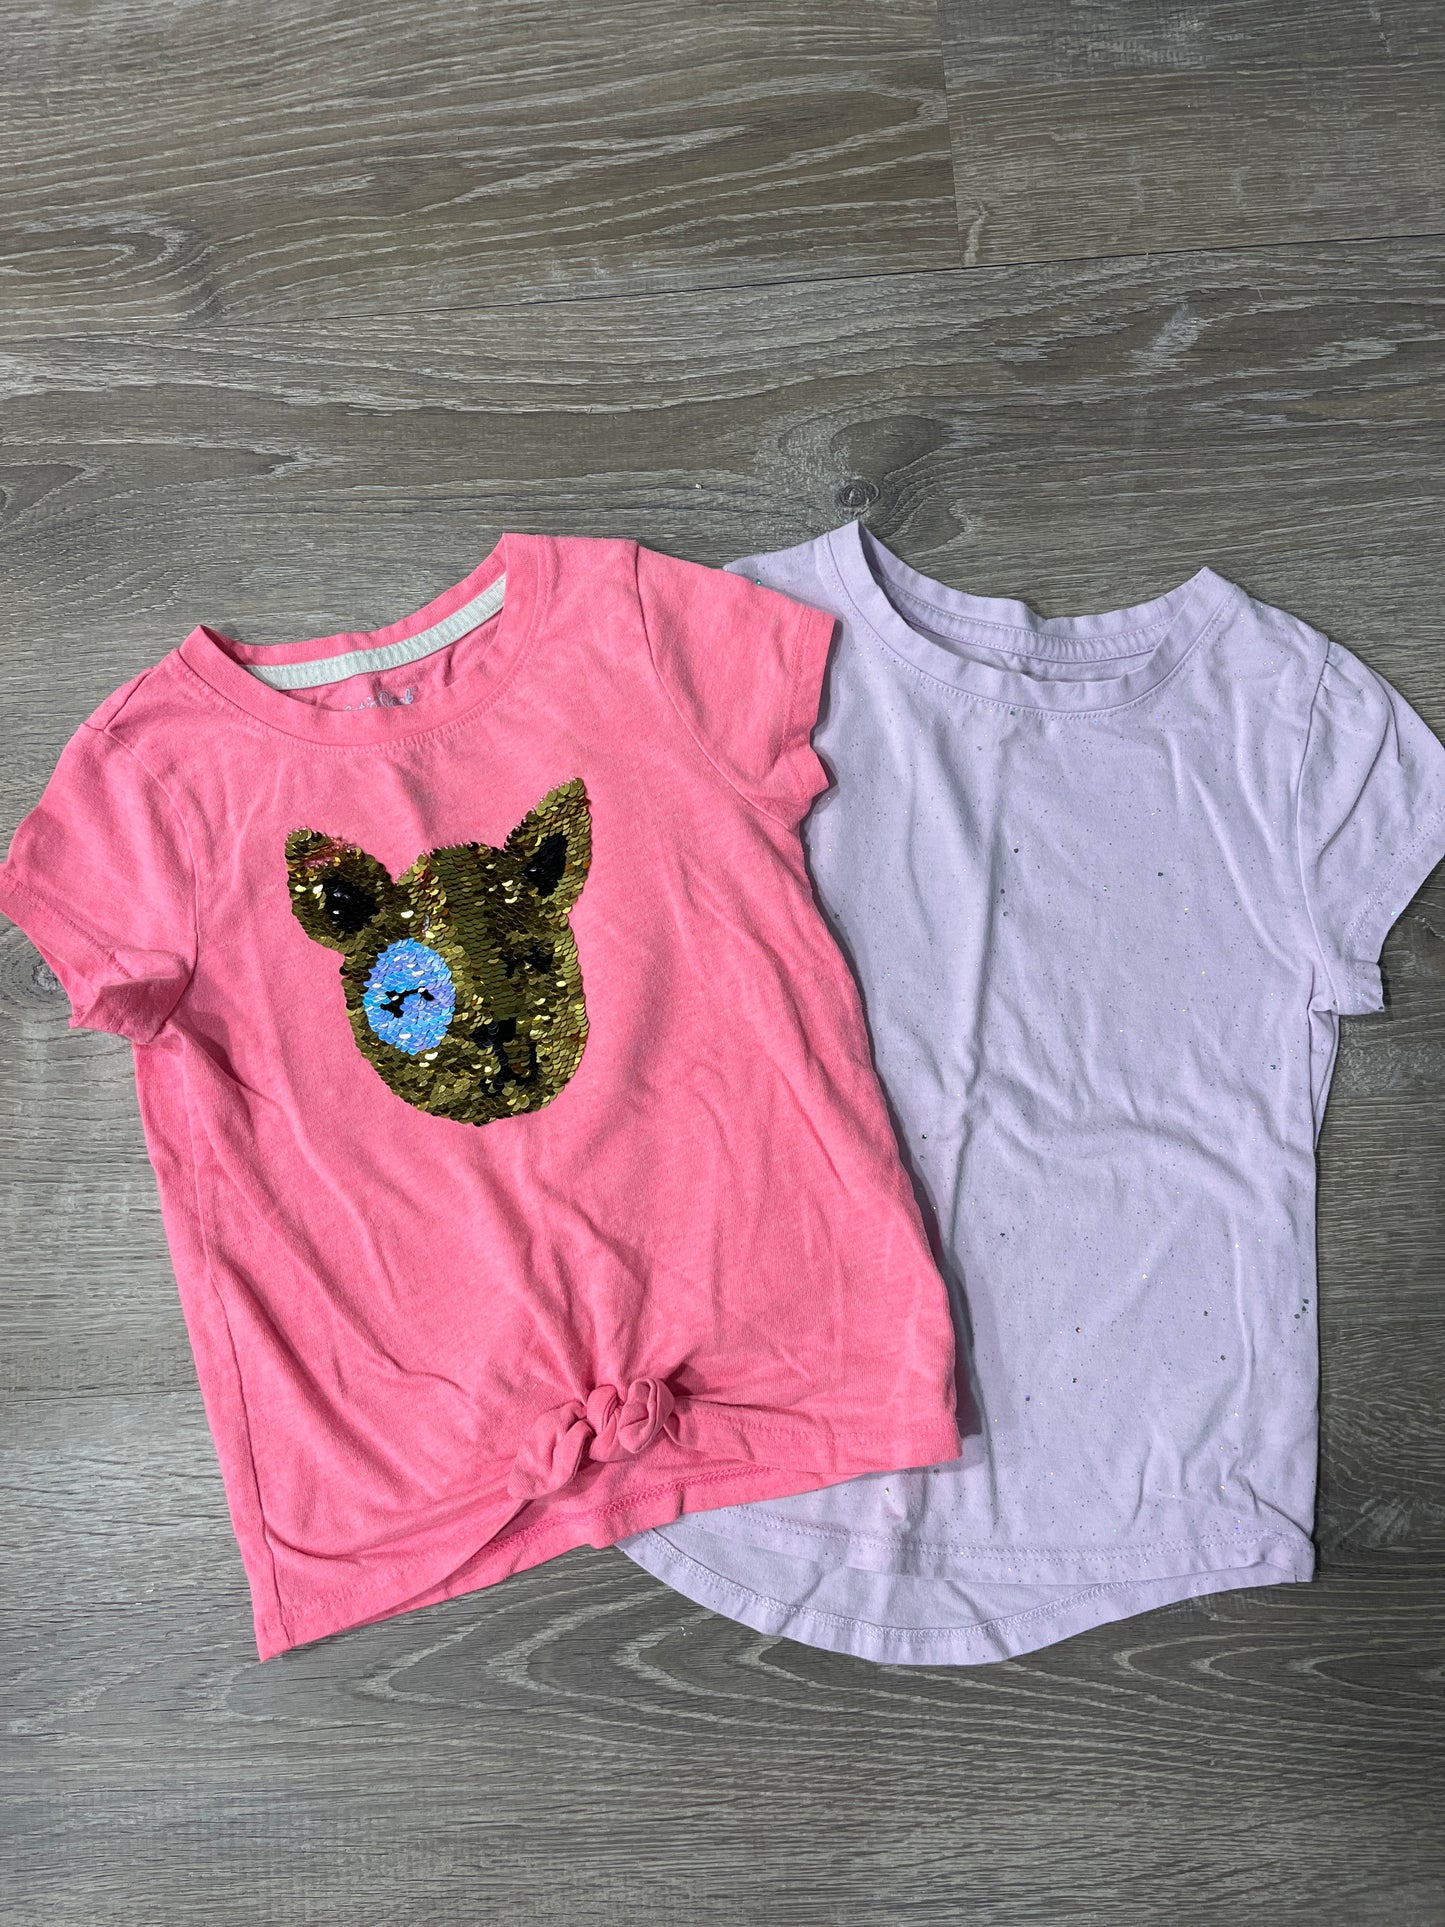 Two Cat&Jack sparkly tshirts size 5